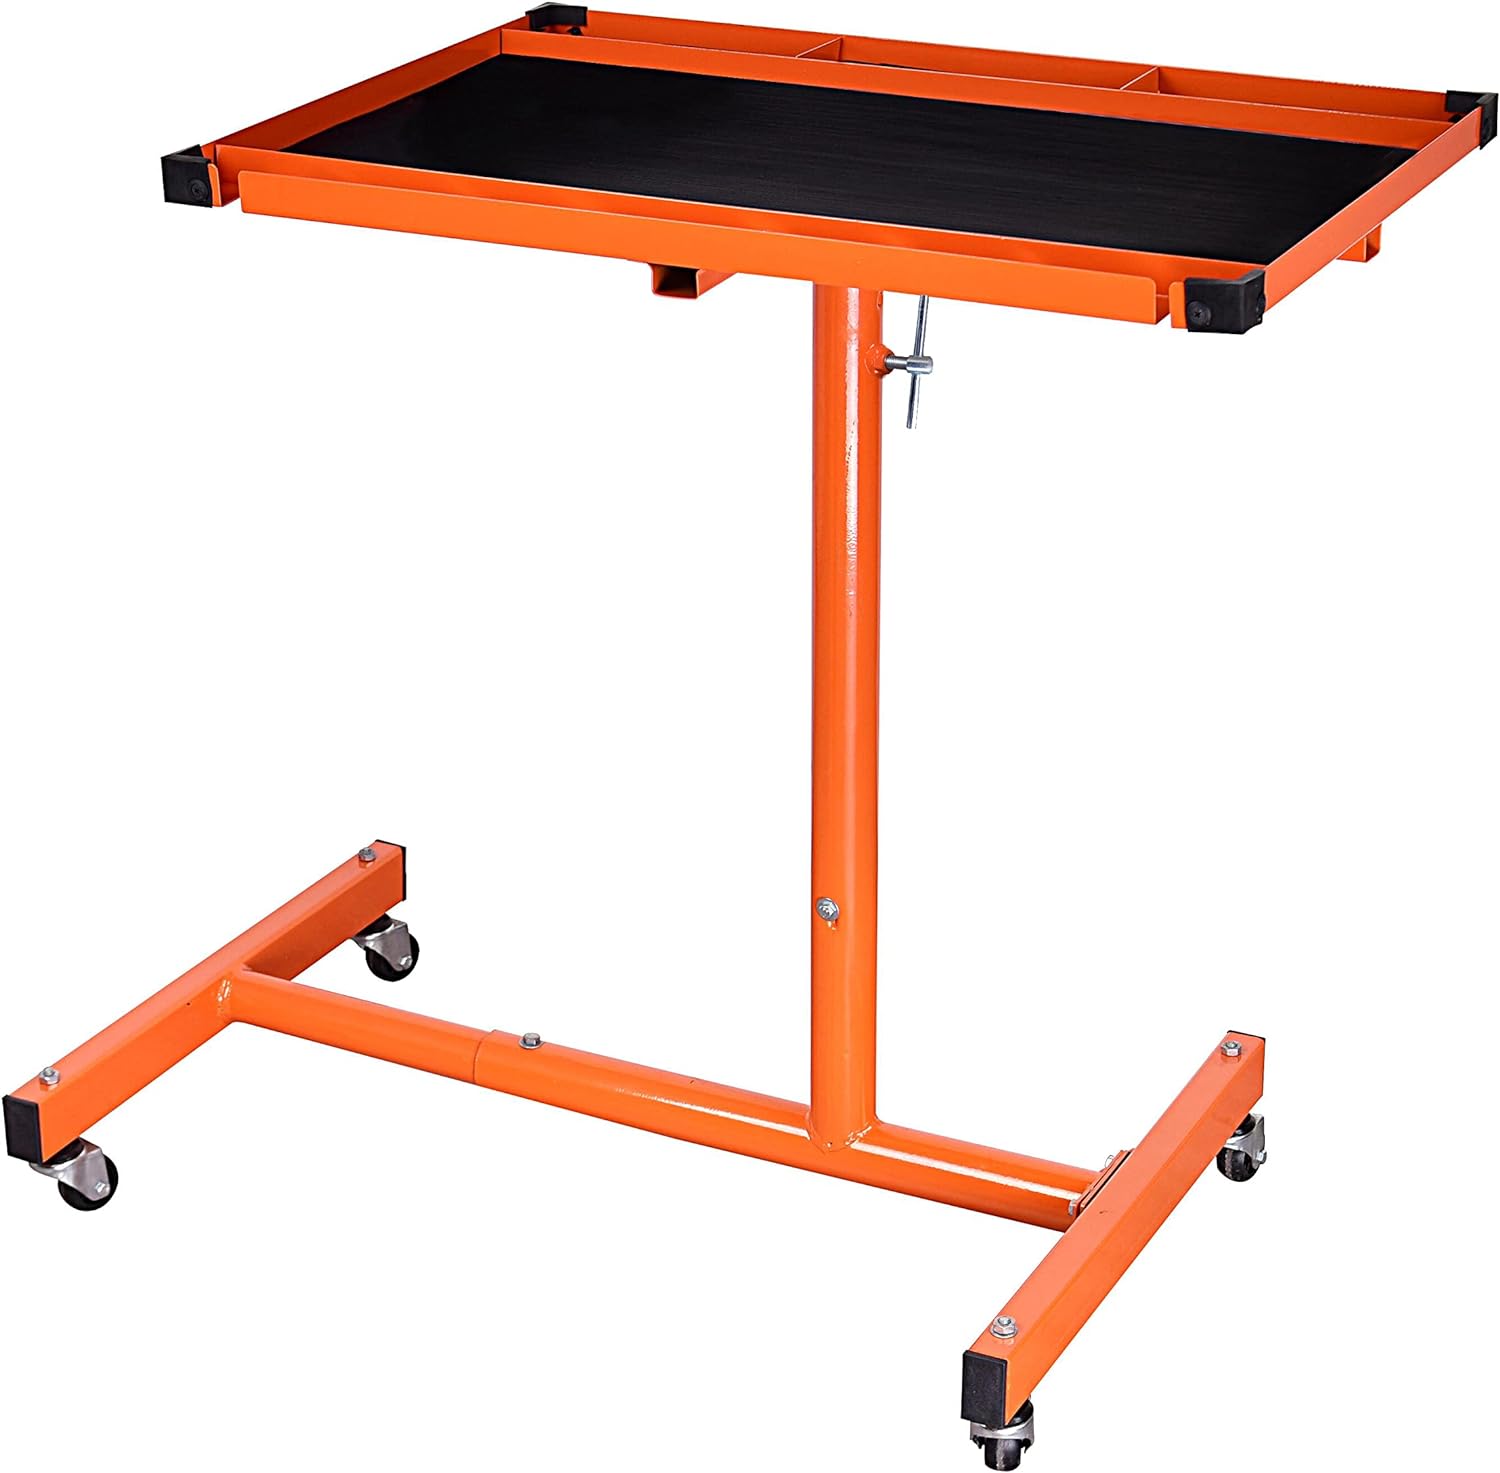 Aain &#194;® L018A Heavy-Duty Adjustable Work Table with Wheels, Mechanic Tray,Mobile Rolling Tool Table, Orange